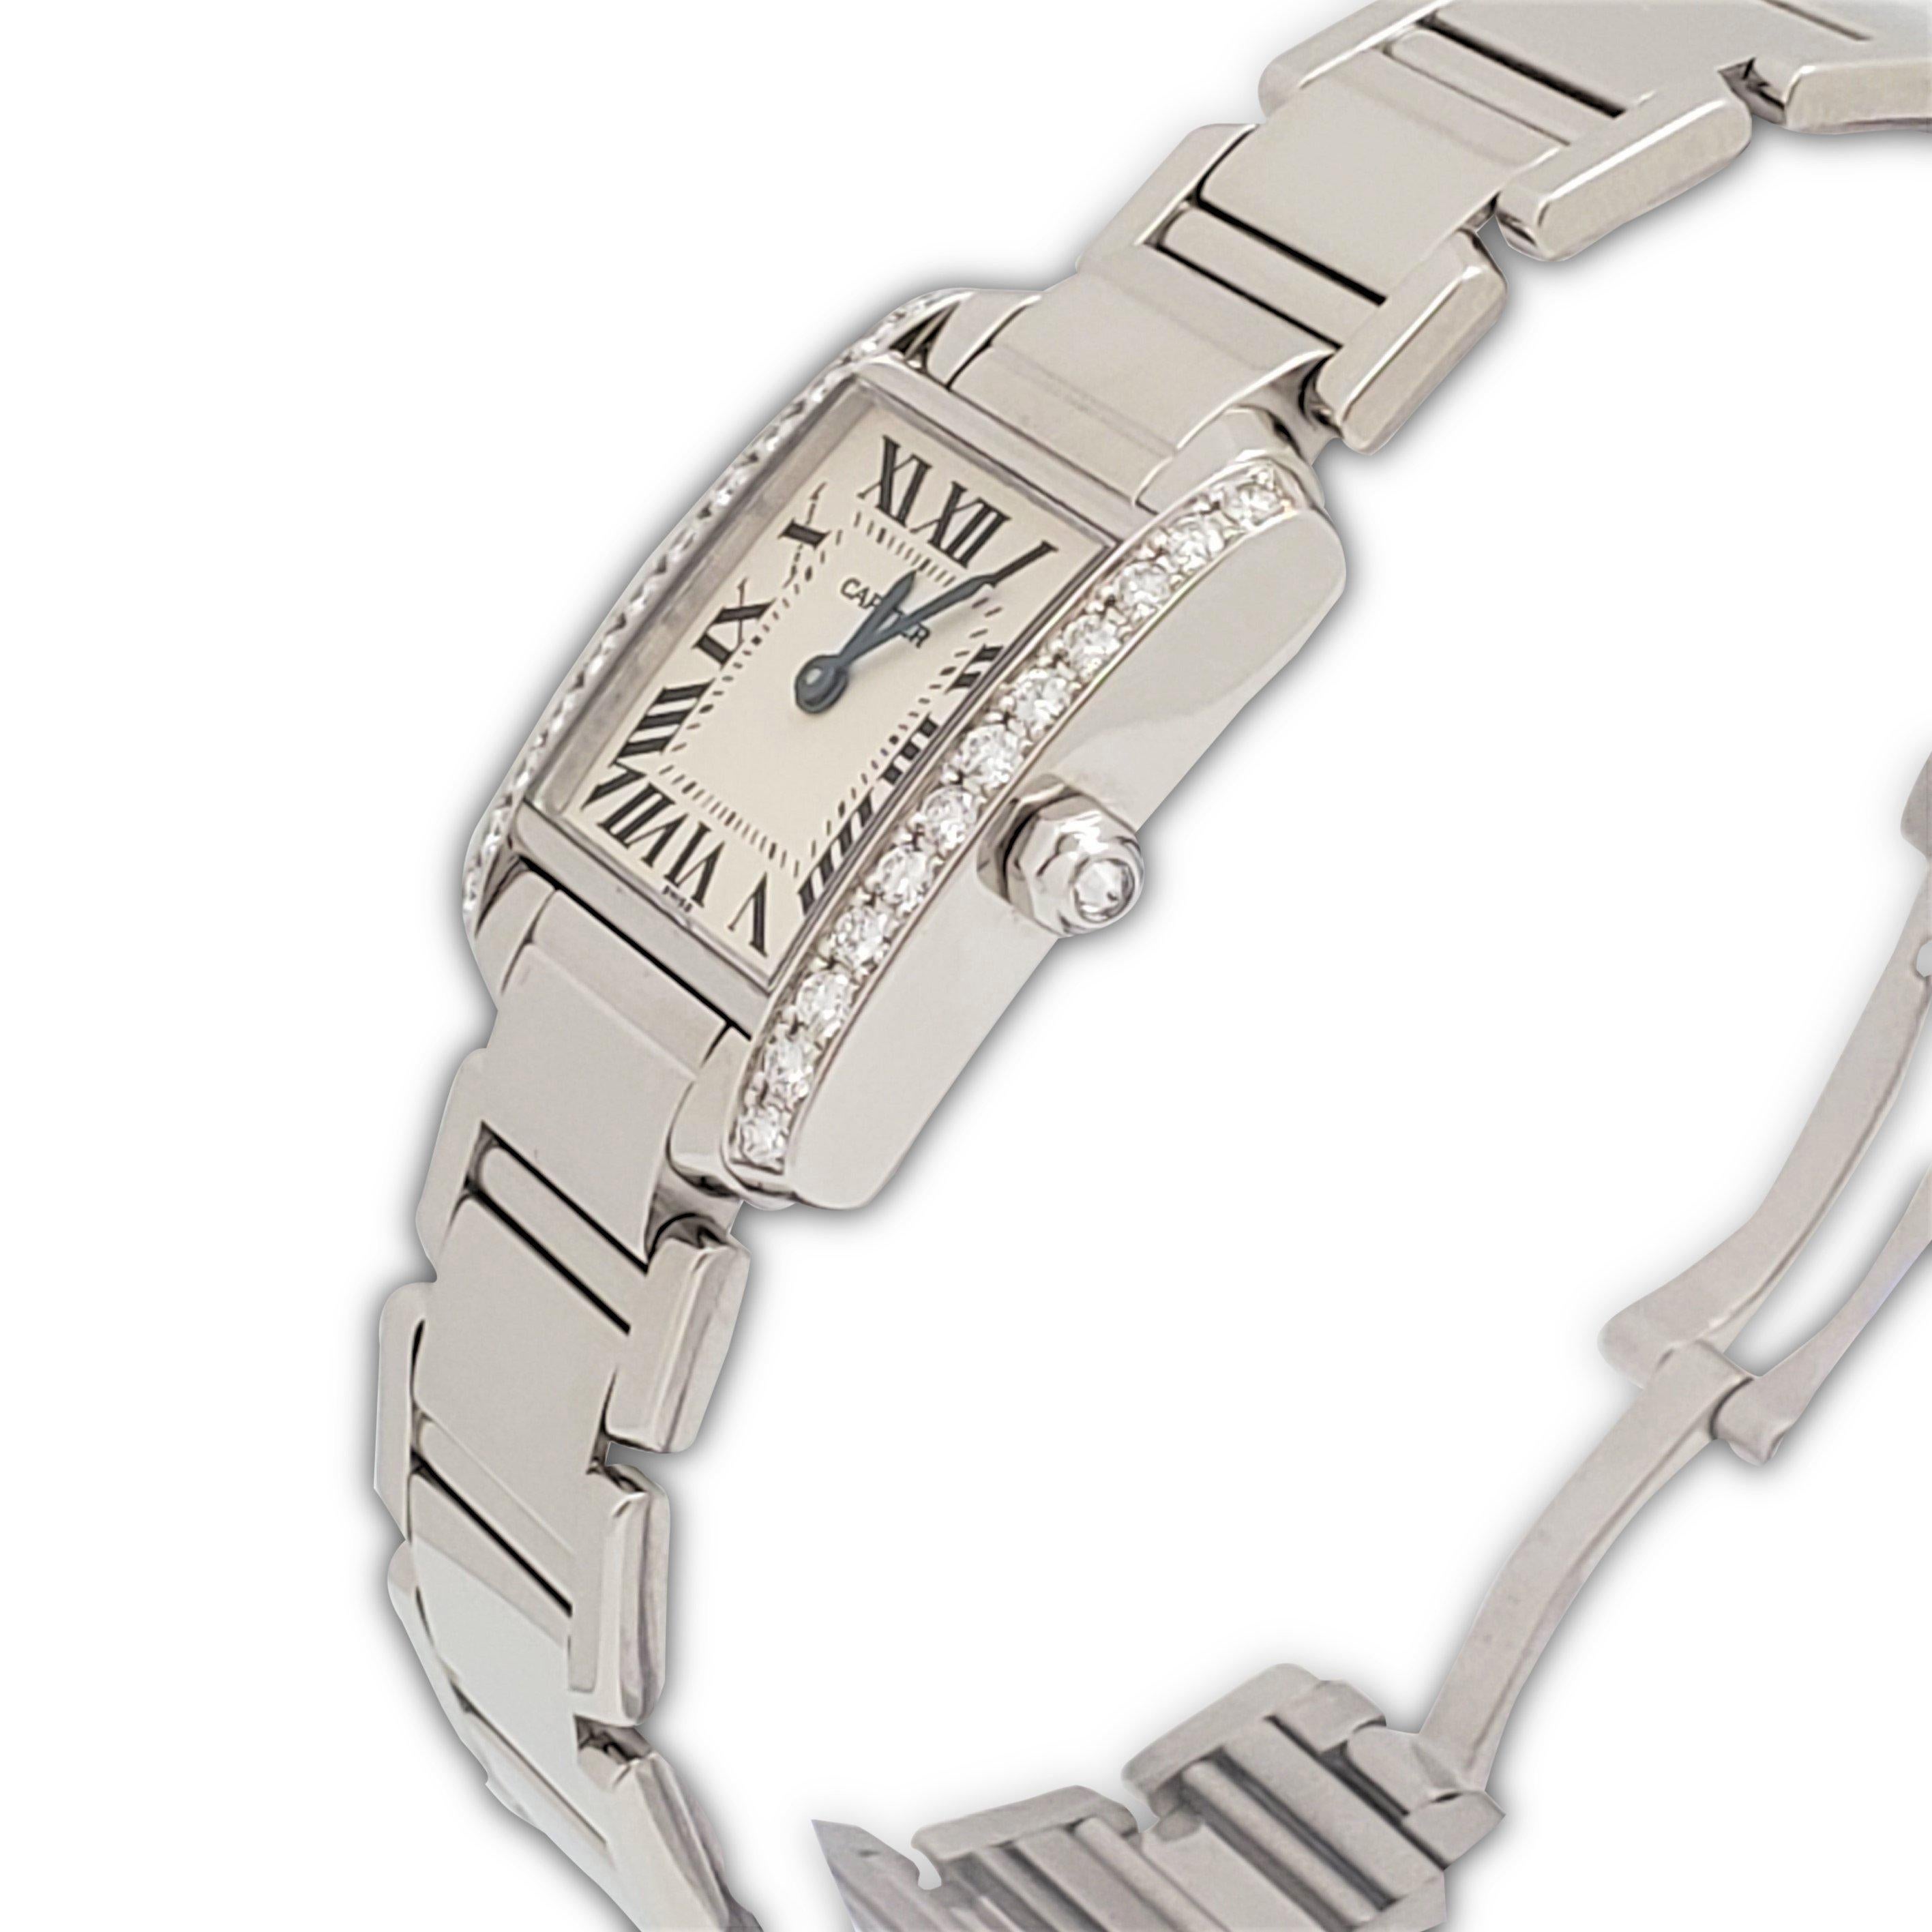 Authentic Cartier 'Tank Française' watch crafted in 18 karat white gold. The rectangular case (20 mm x 25 mm) is set with high-quality round brilliant cut diamonds and the octagonal crown is set with one diamond. Silvered dial with painted black